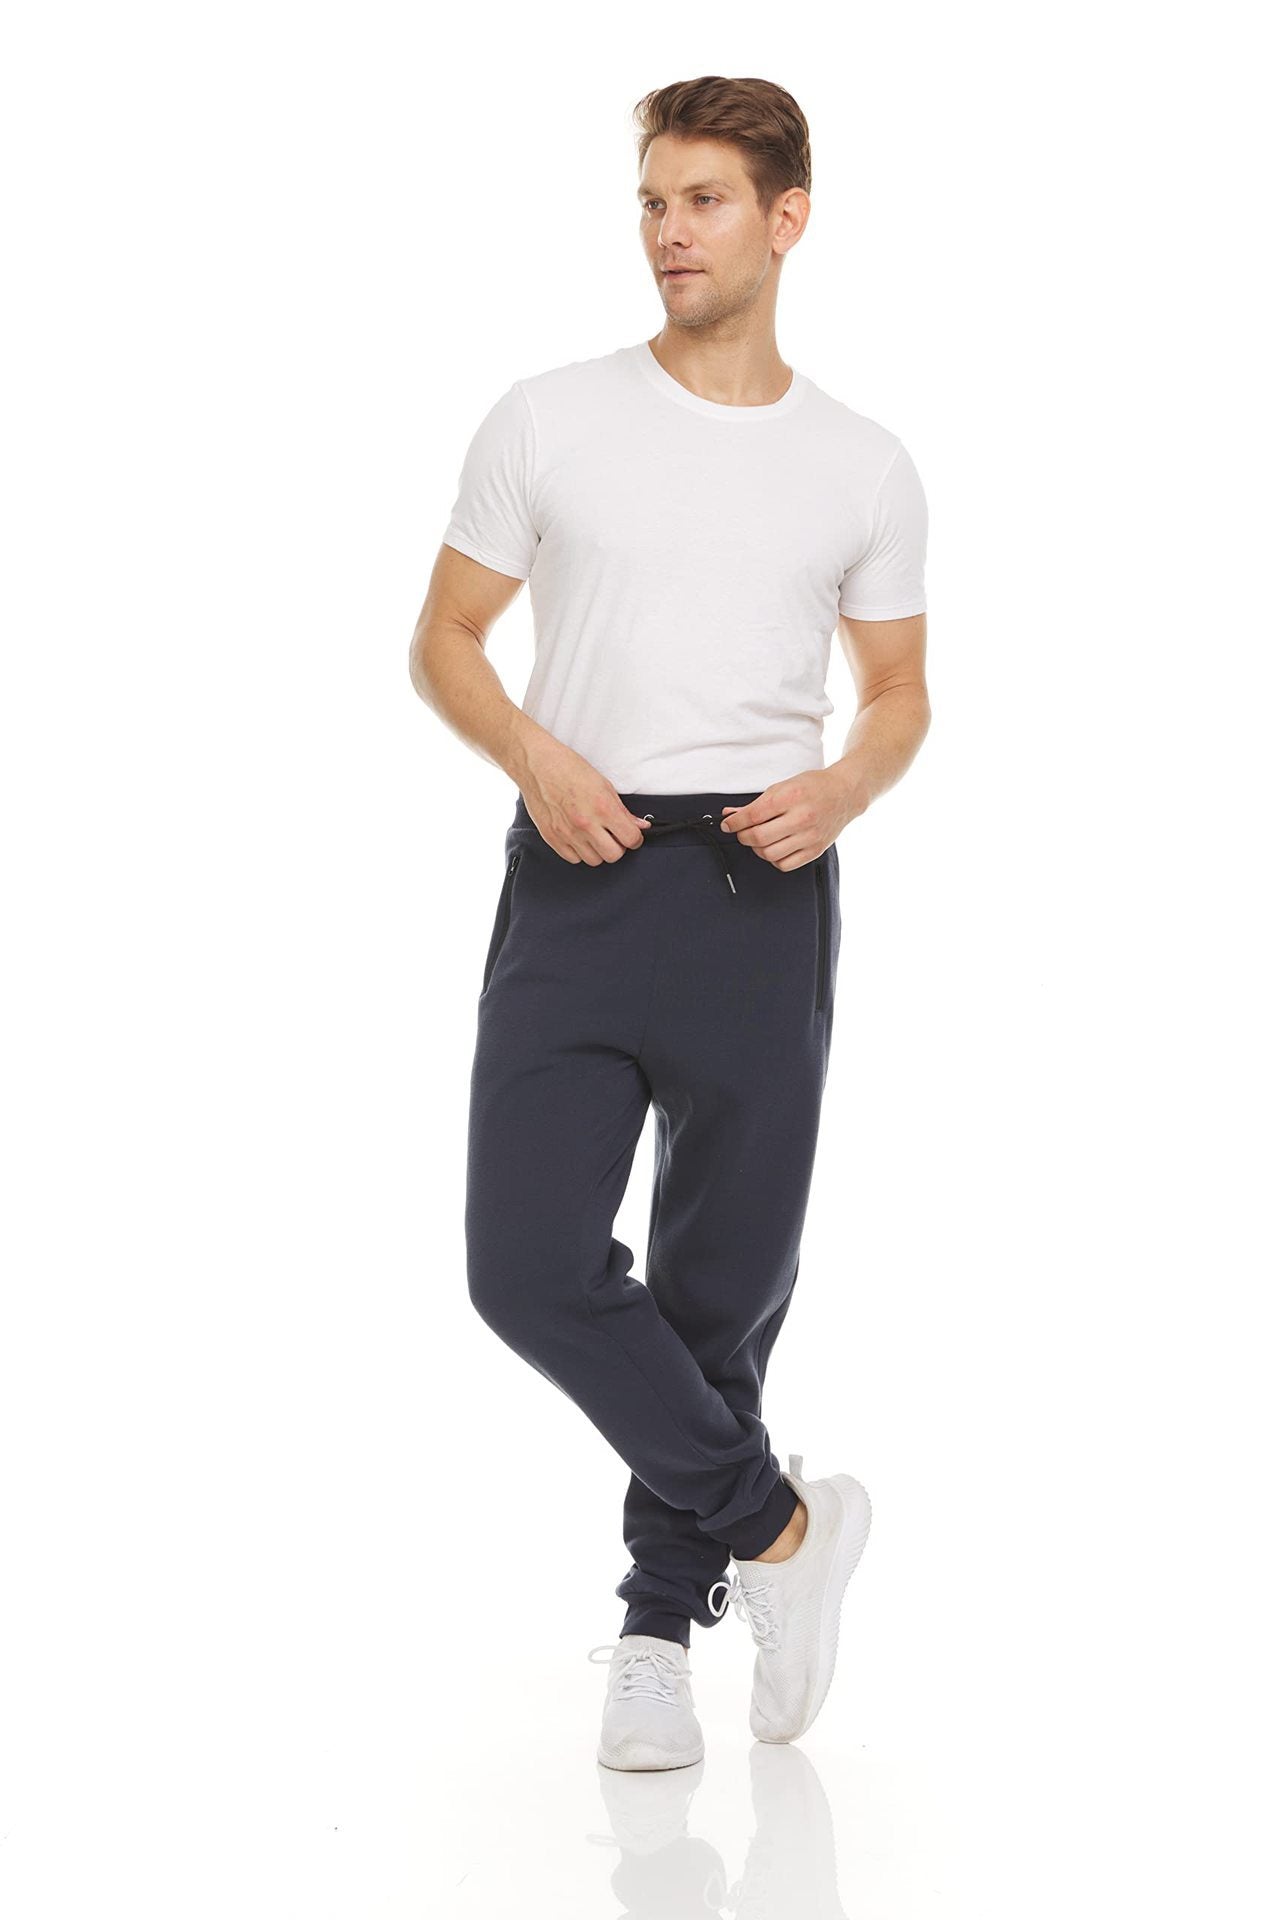 Men's Sports Casual Zipper Ankle-tied Feet Running Trousers